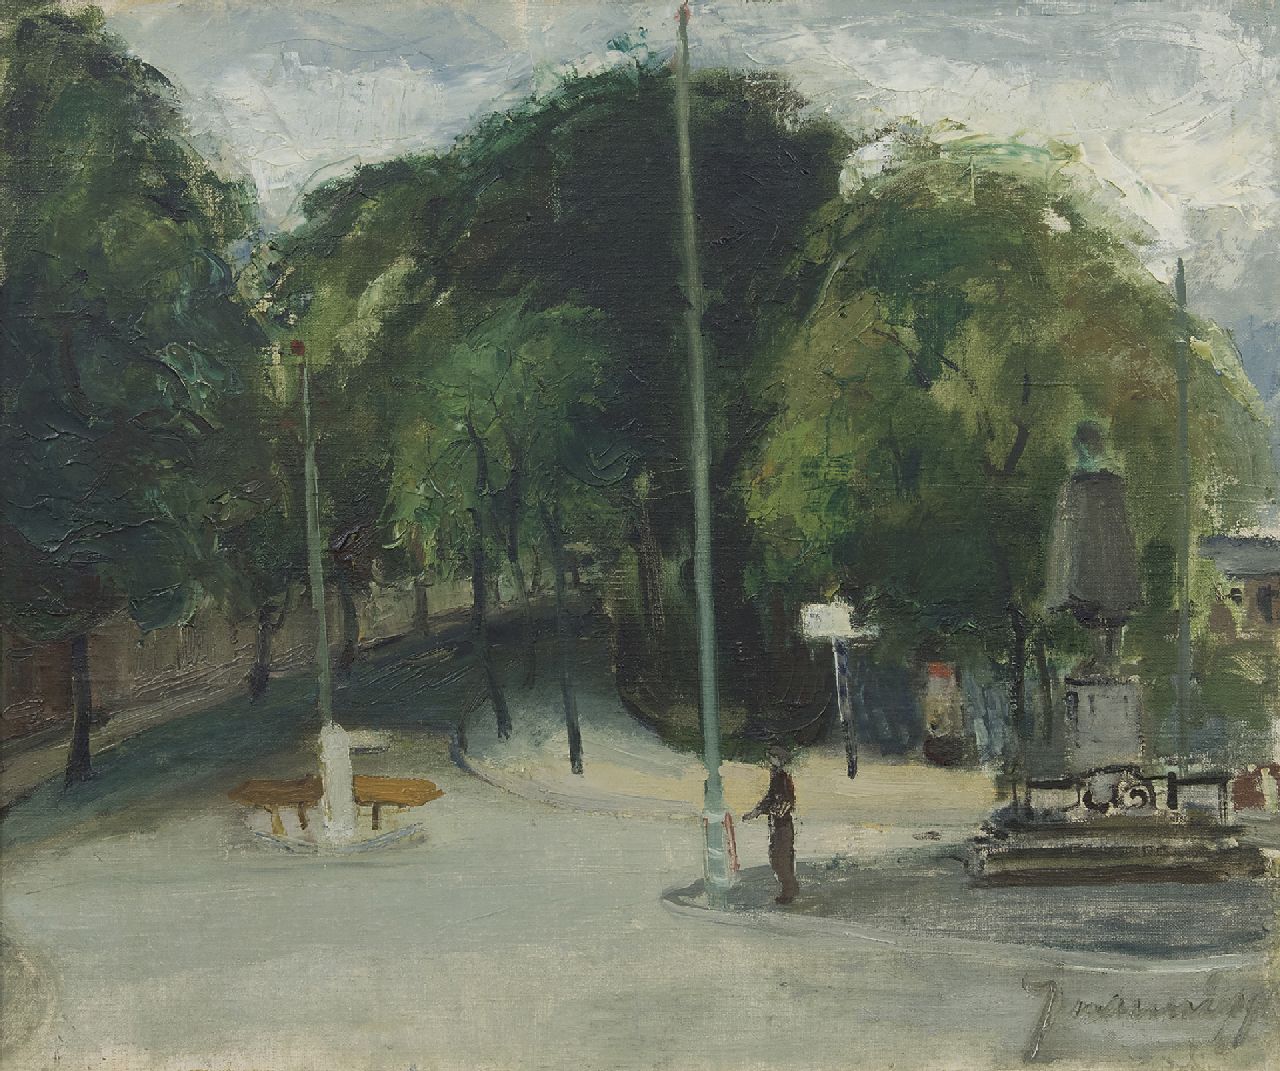 Nanninga J.  | Jacob 'Jaap' Nanninga | Paintings offered for sale | A view from the Plaats, The Hague, oil on canvas 50.5 x 60.5 cm, signed l.r. and painted ca. 1939-1945